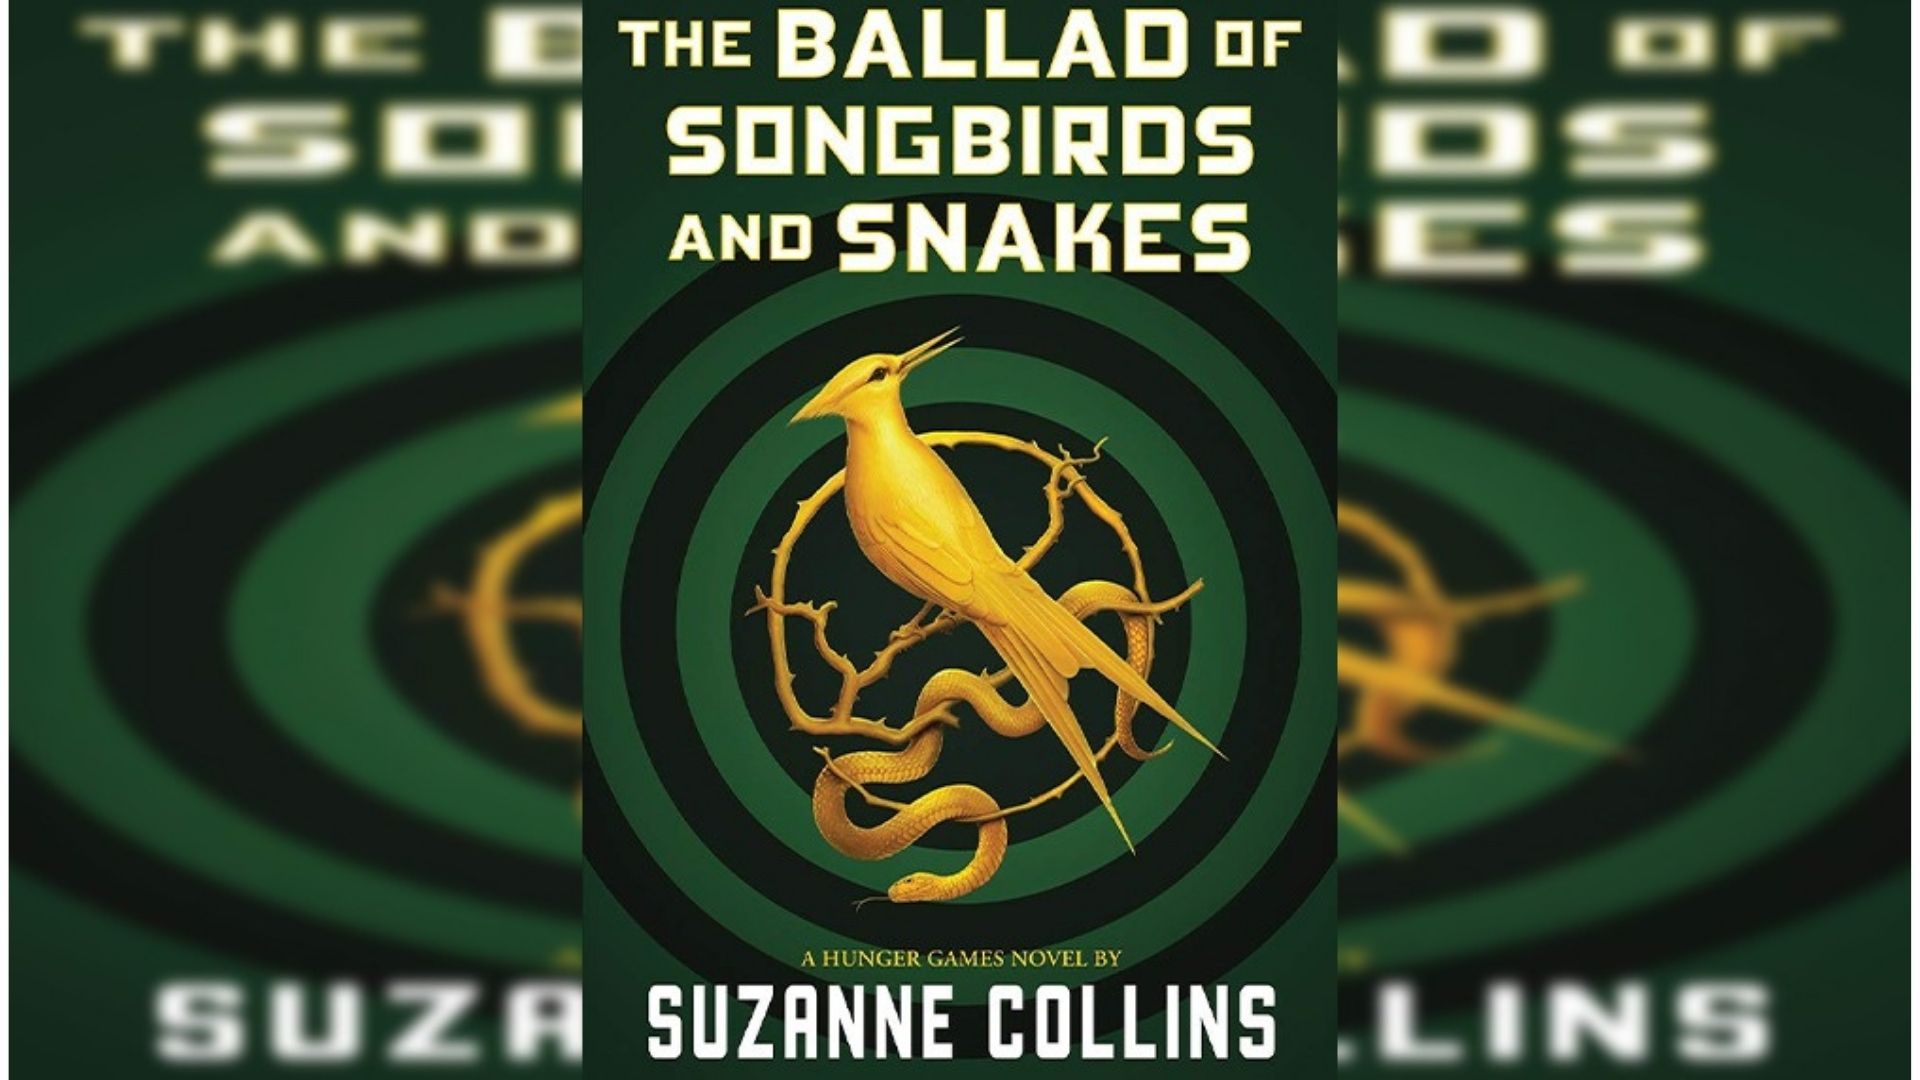 The Hunger Games' Returns With the New Prequel, The Ballad of